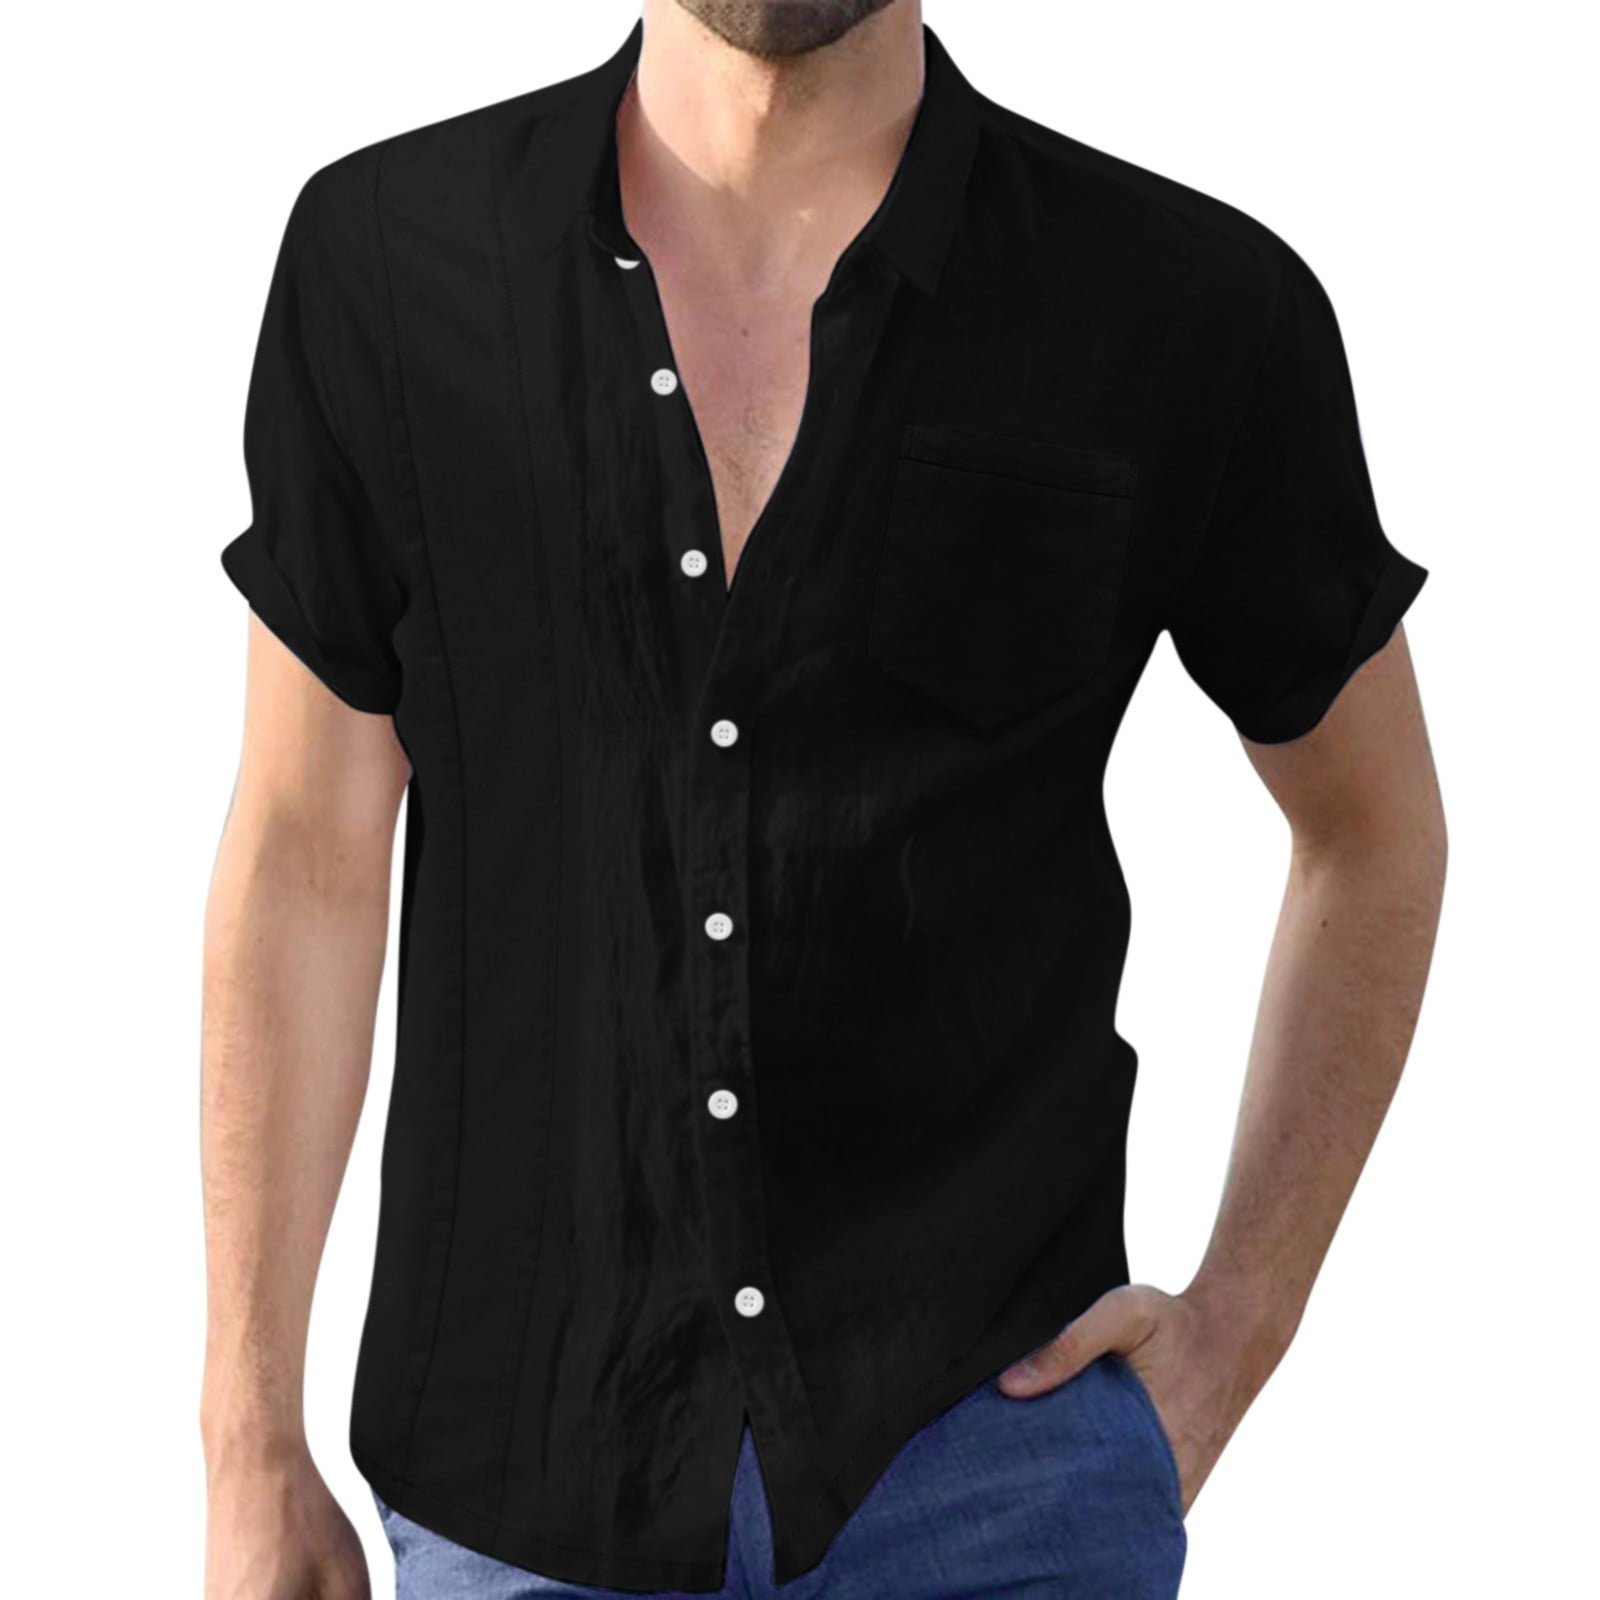 rinsvye Blouse Top For Man Solid Outdoor Loose Casual Shirts Tuxedo ...